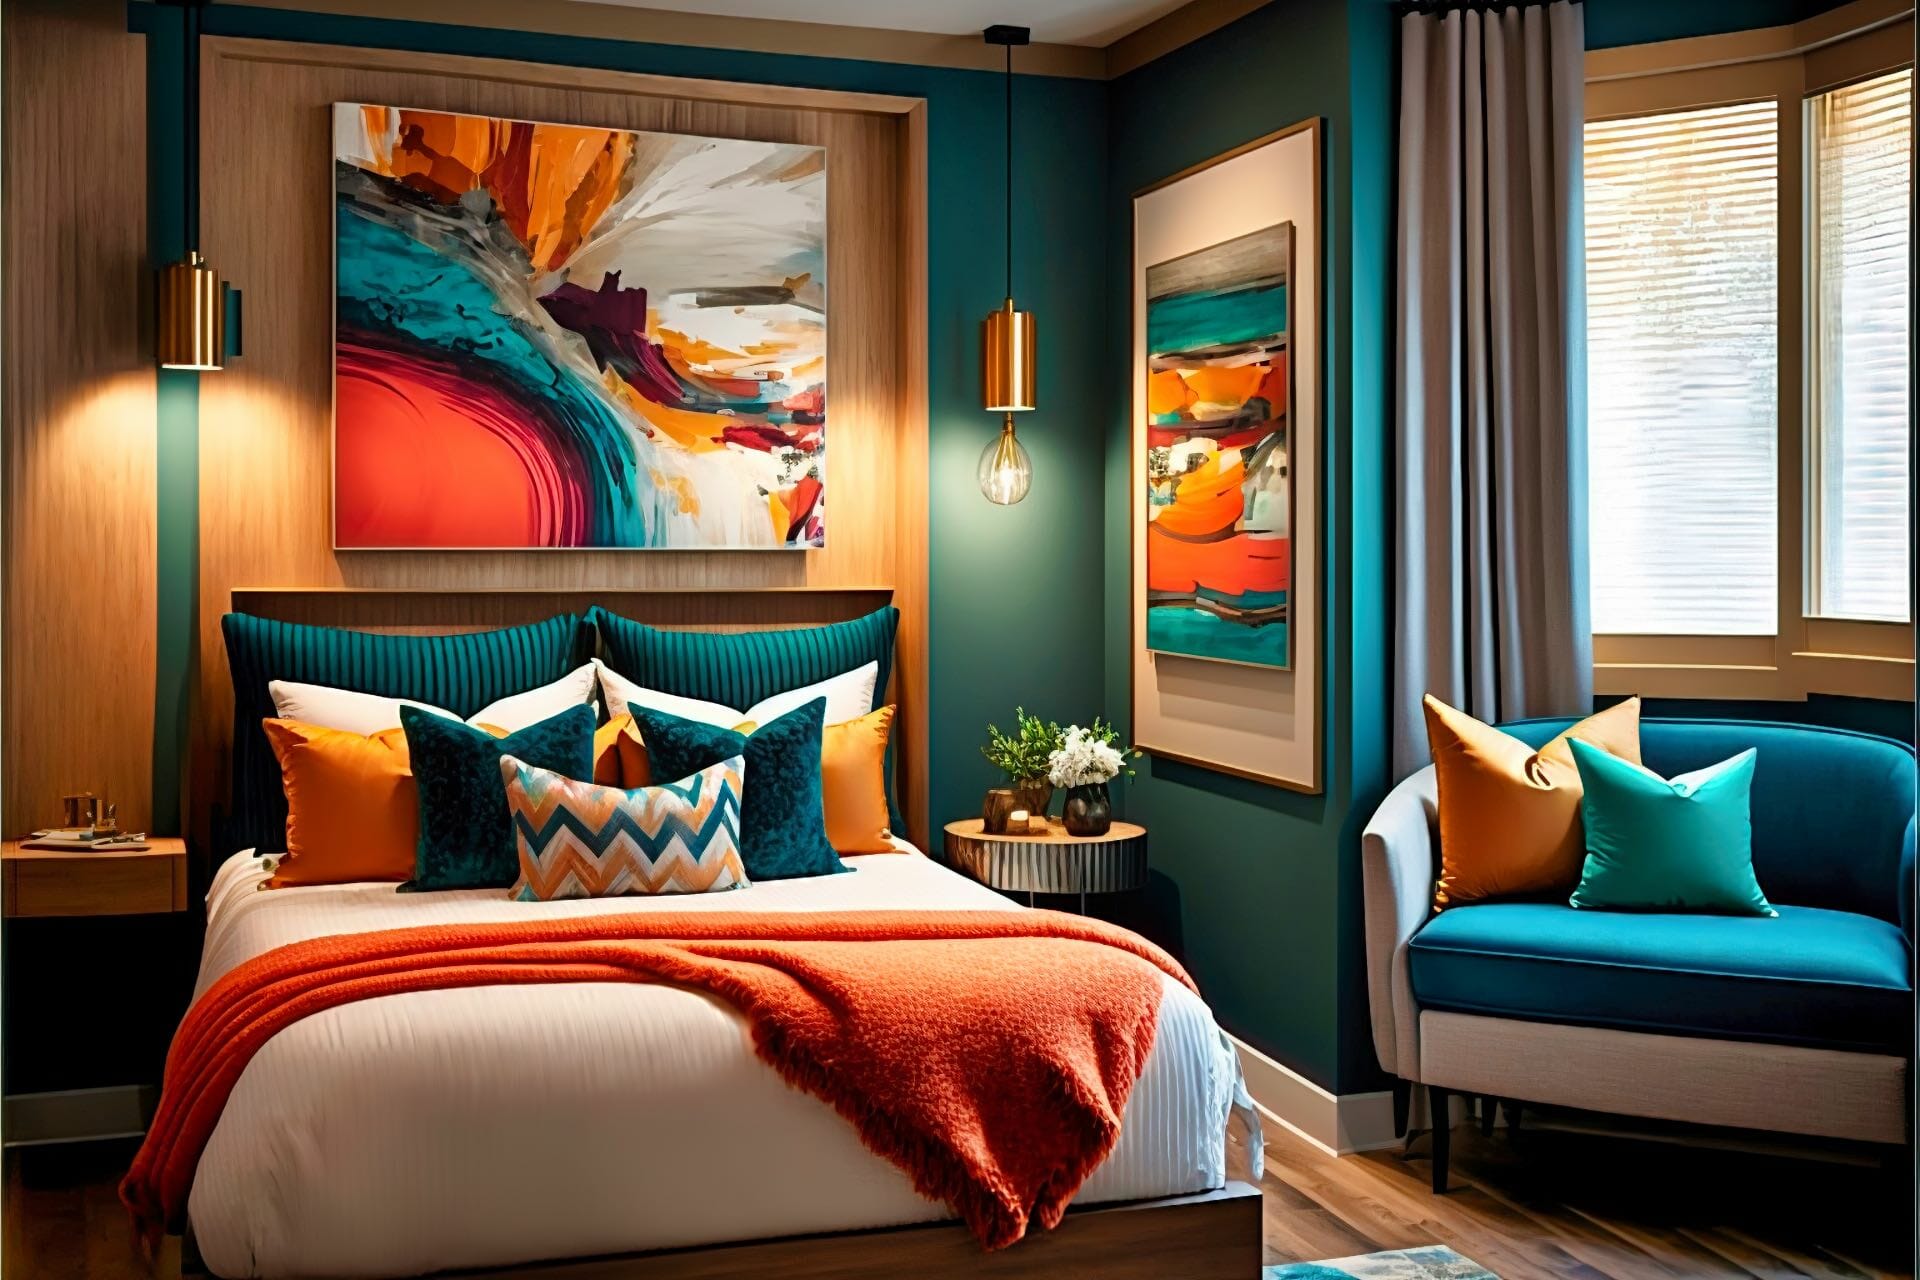 Warm Modern Bedroom With Abstract Art Upscale